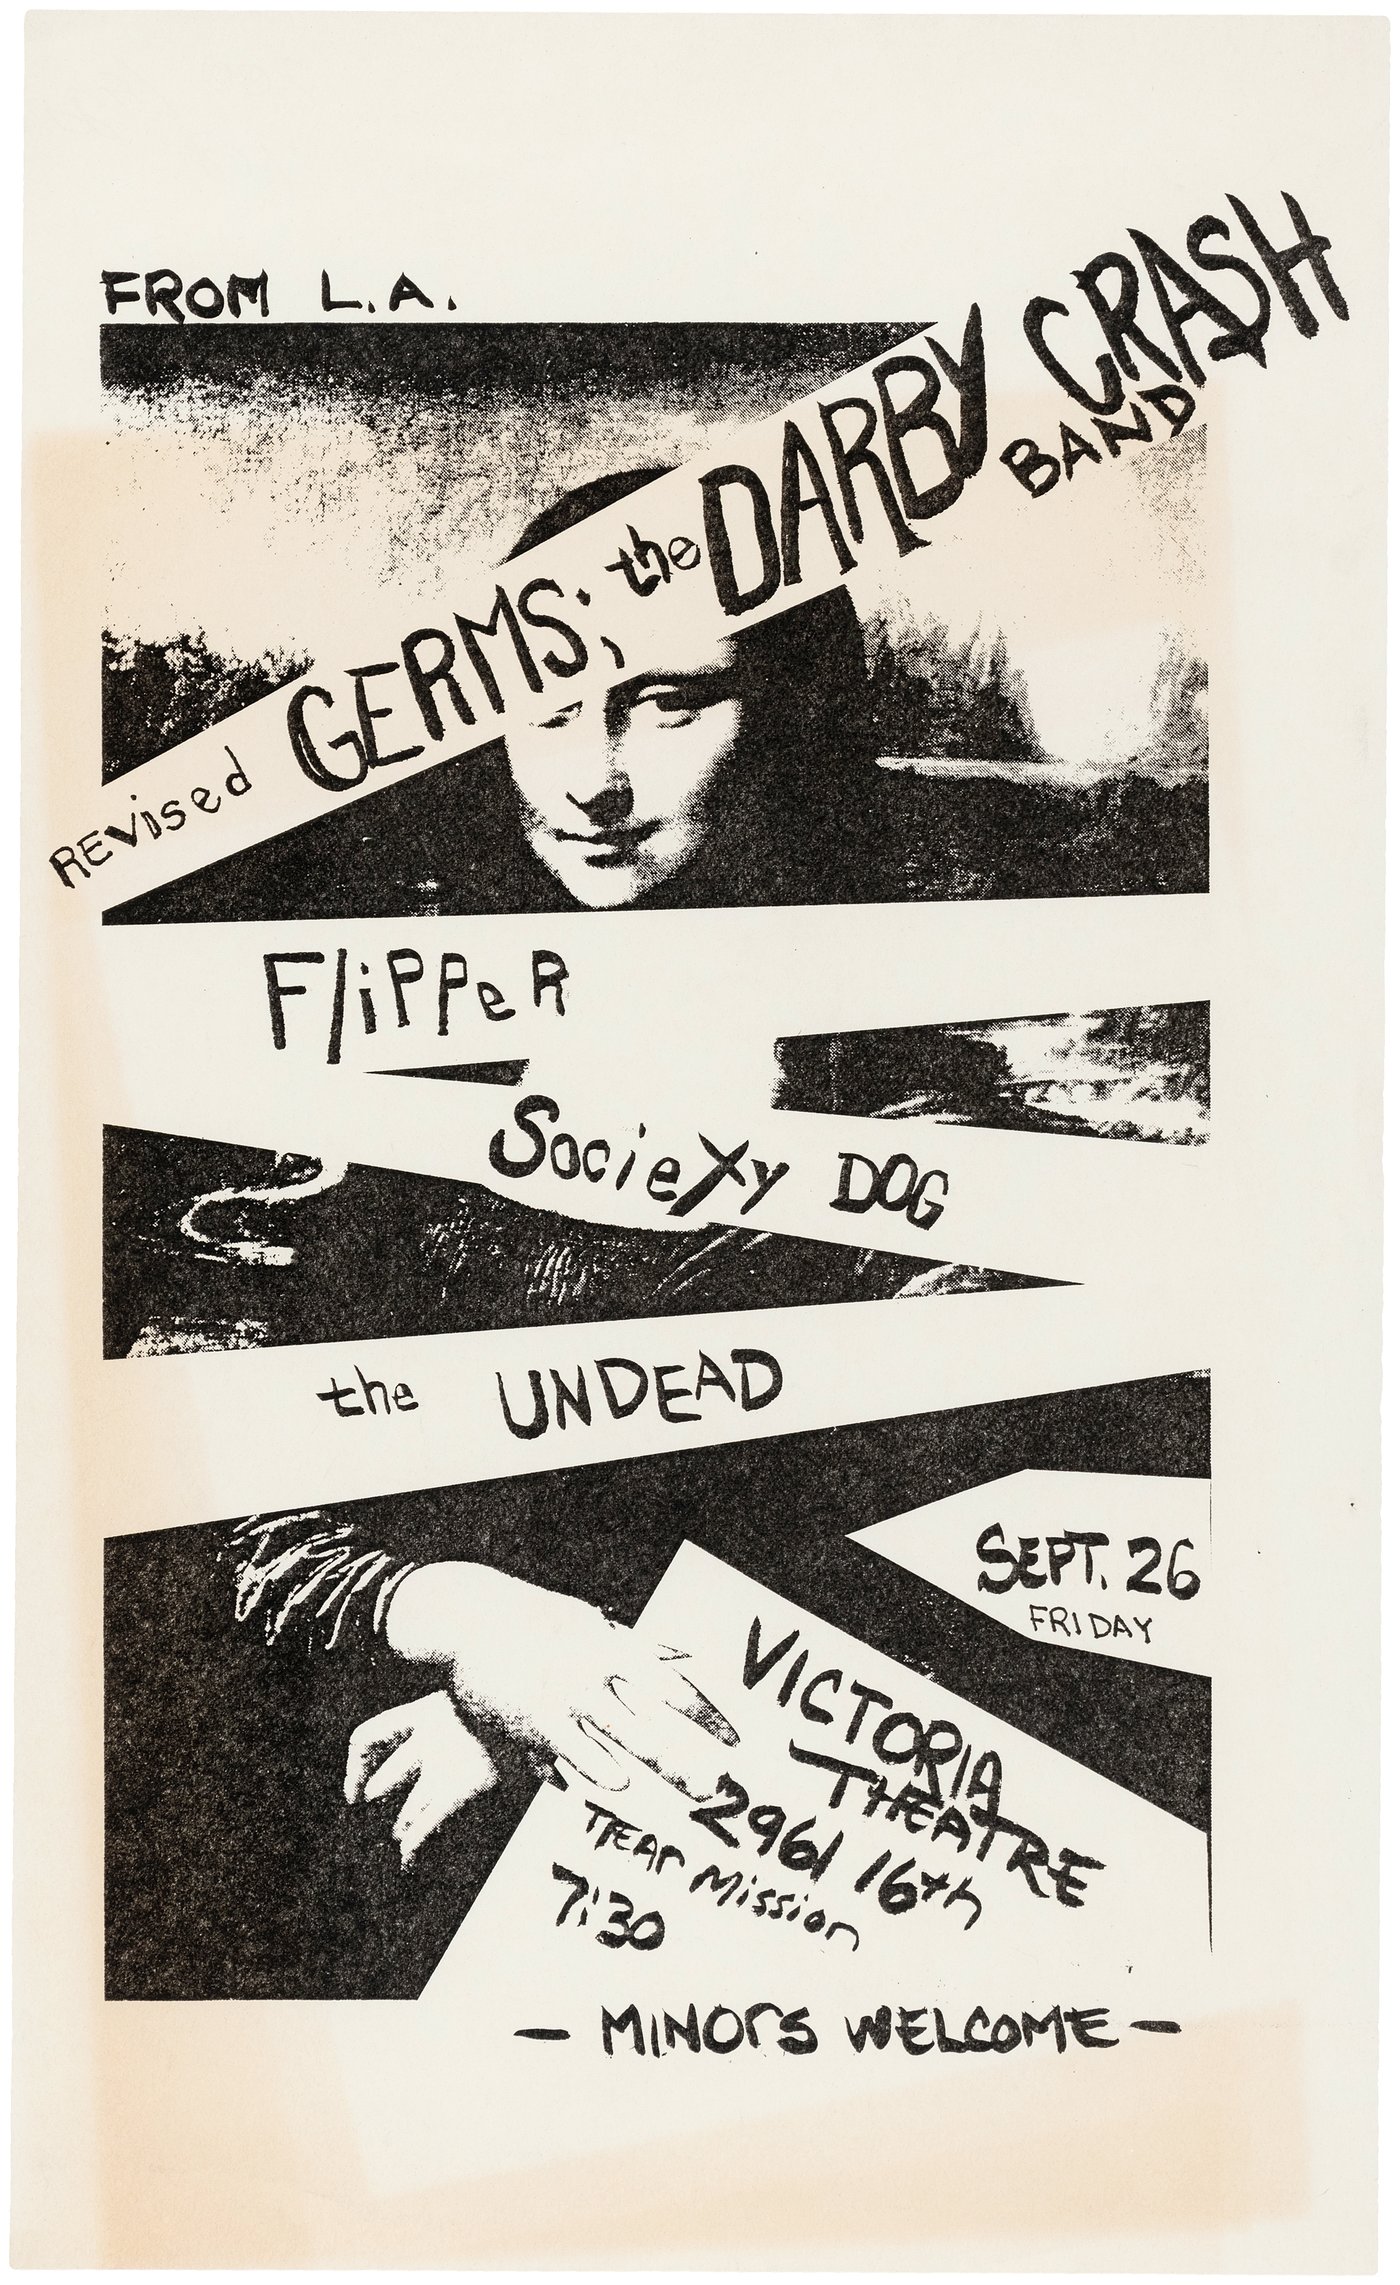 Hake's - THE GERMS DARBY CRASH BAND TRIO OF PUNK CONCERT FLYERS & POSTER.